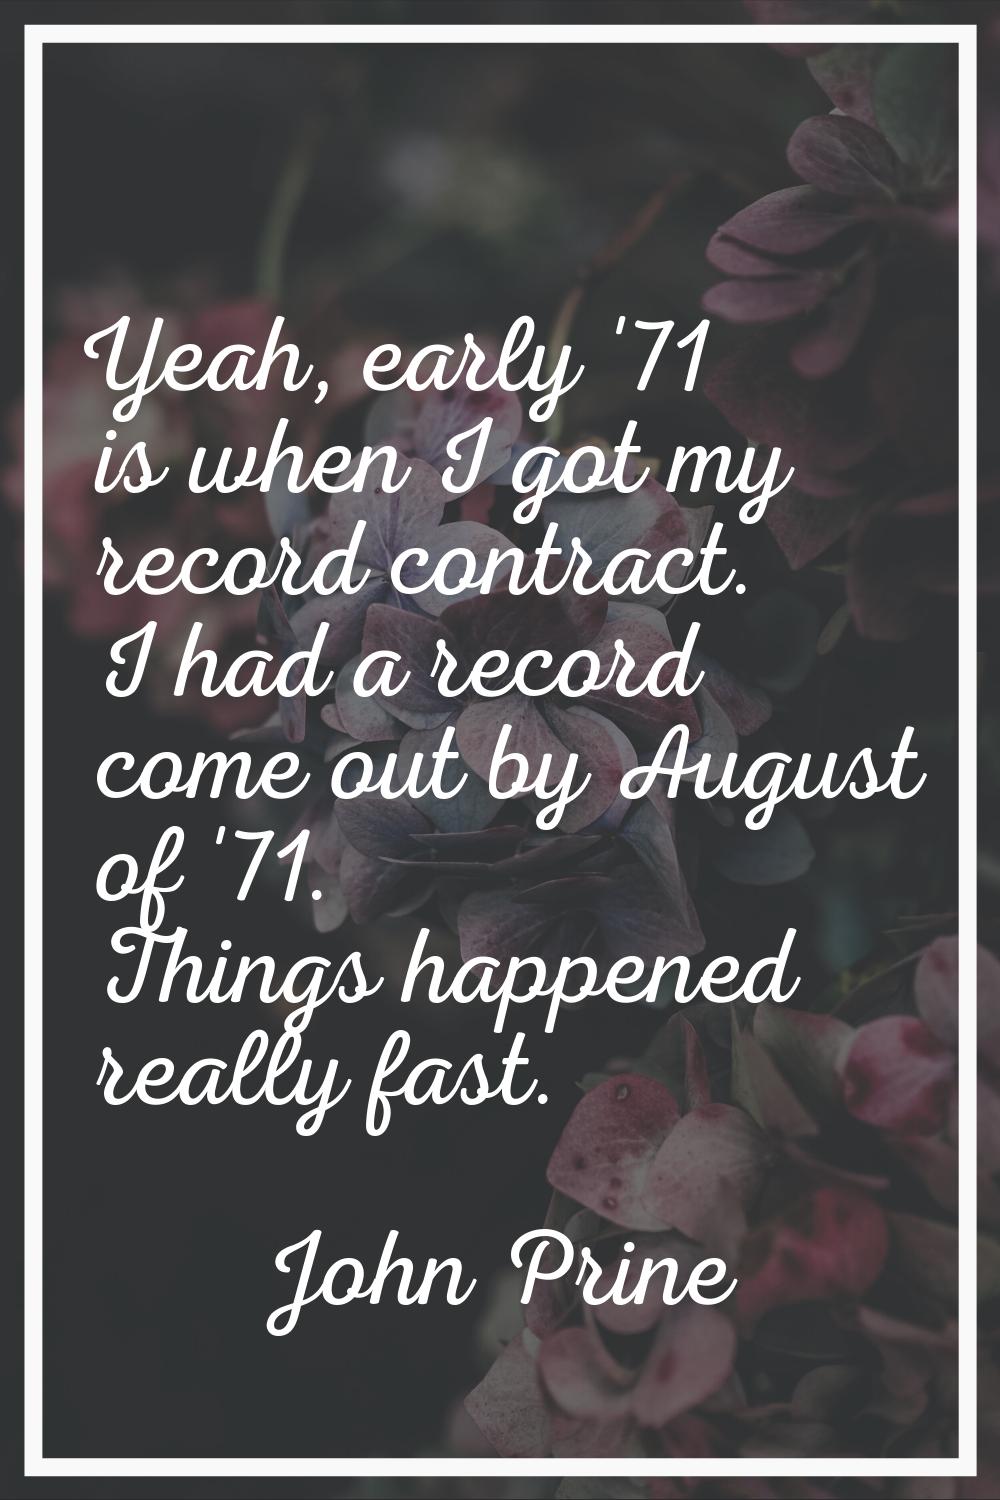 Yeah, early '71 is when I got my record contract. I had a record come out by August of '71. Things 